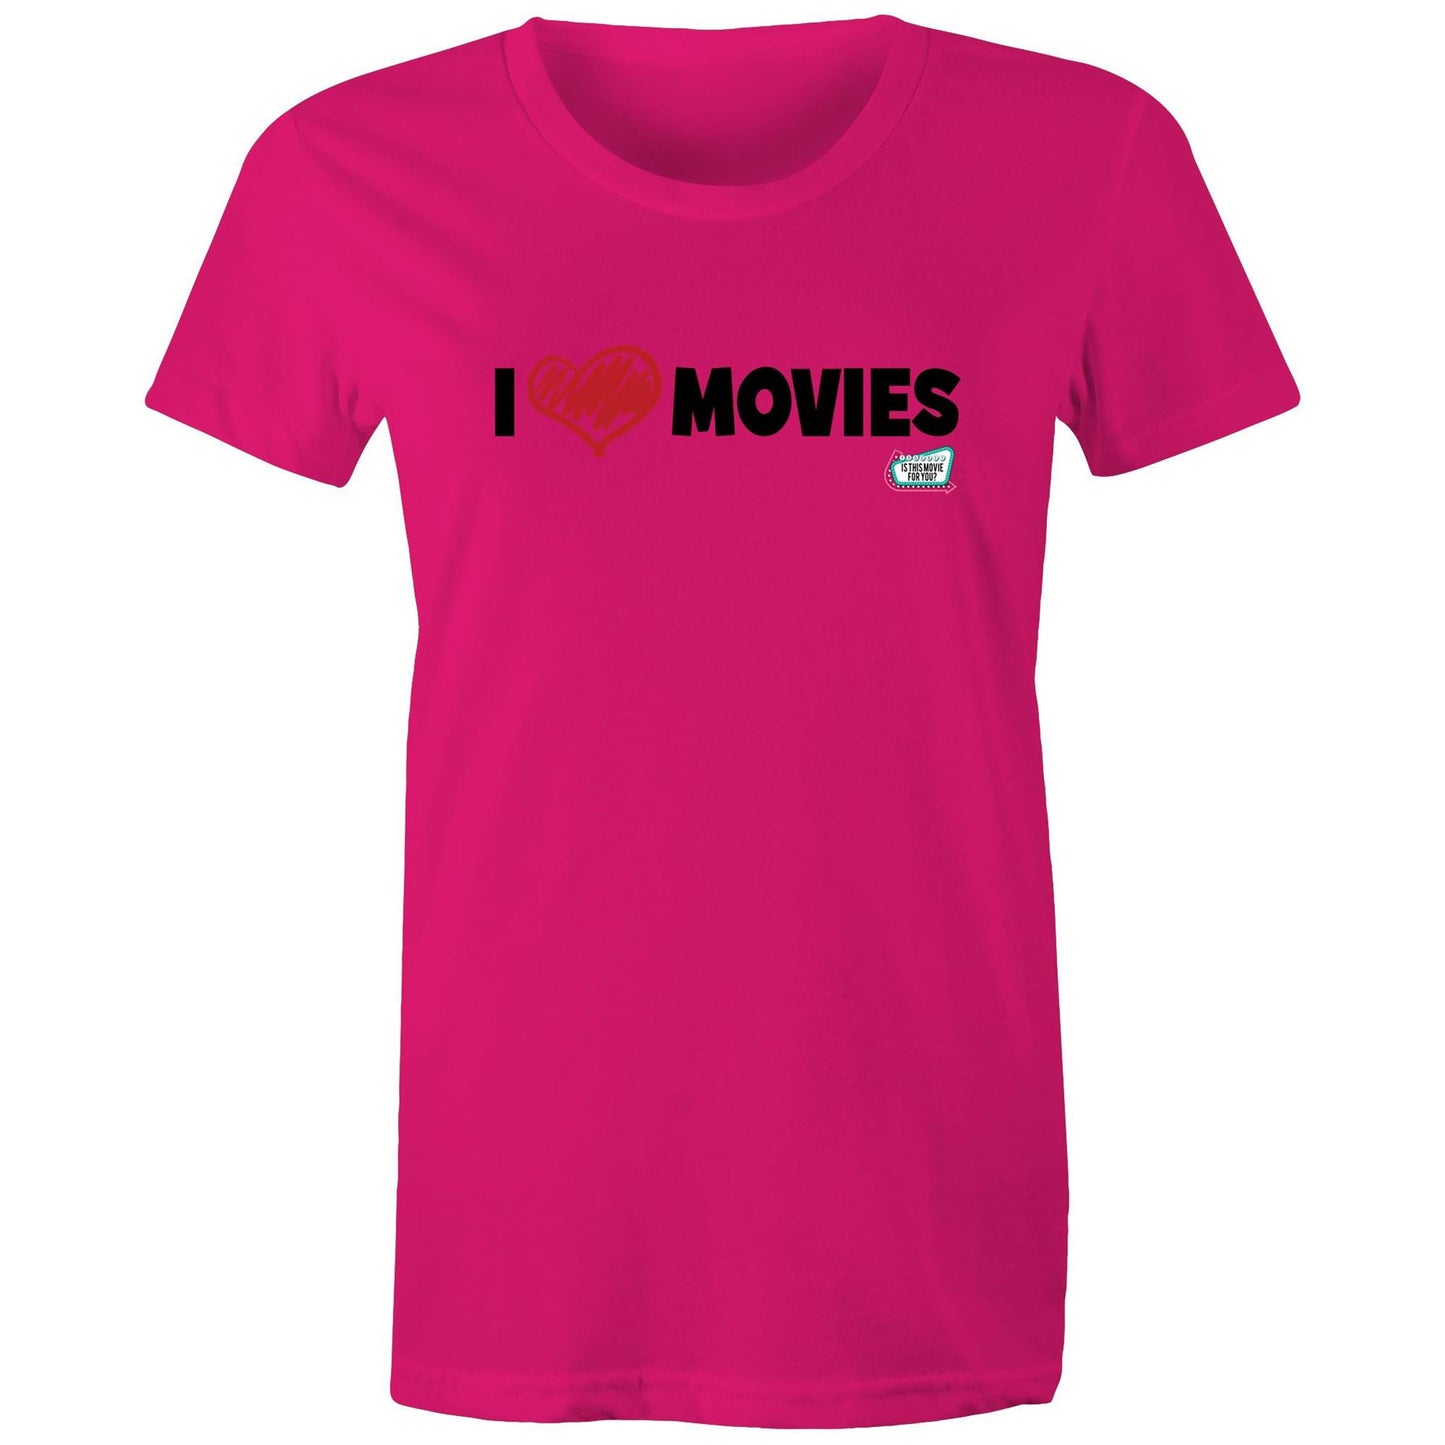 'I Love Movies' Is This Movie For You? (black font) AS Colour - Women's Maple Tee